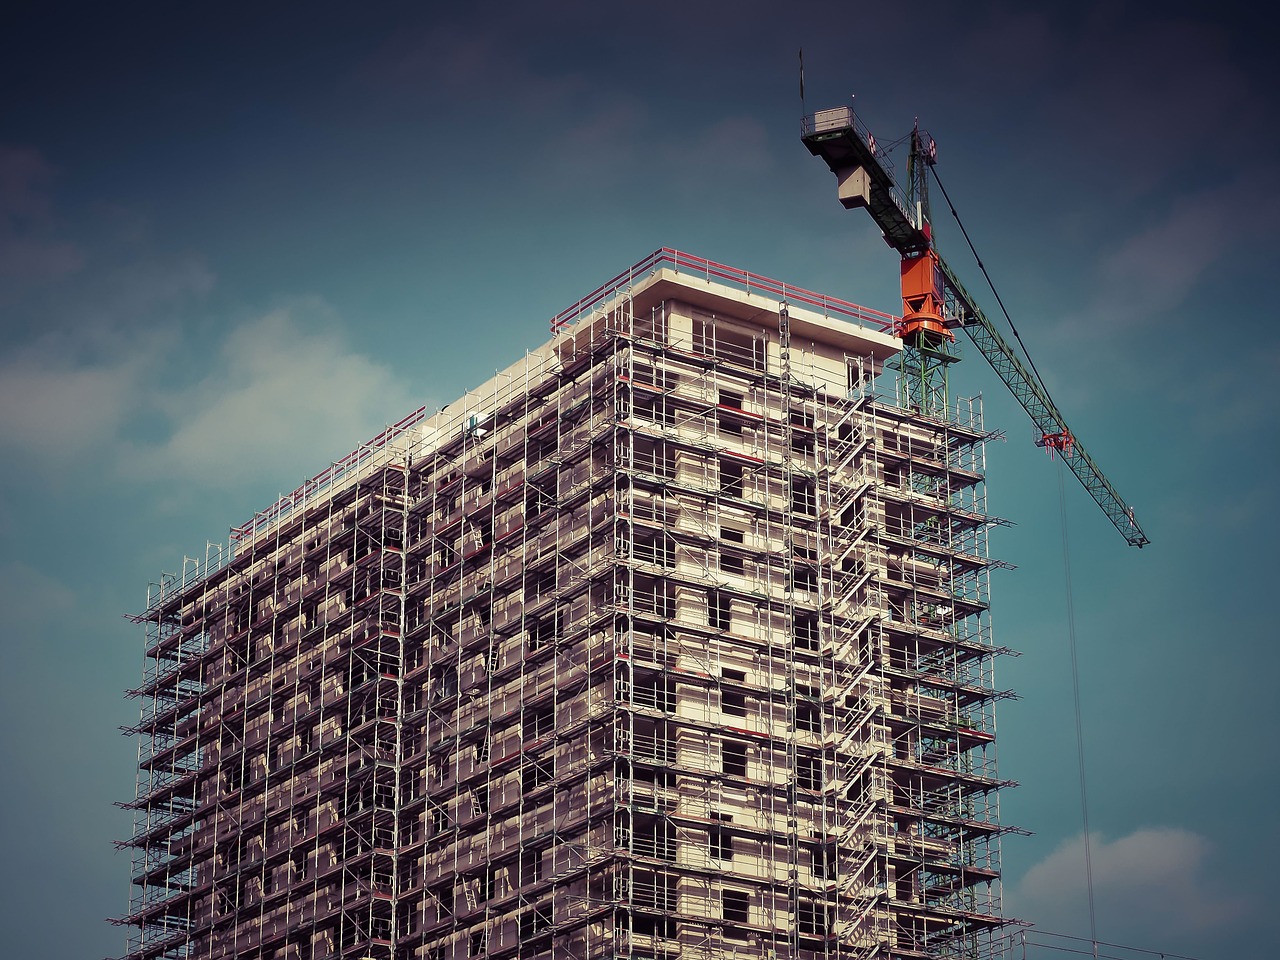 3 Reasons to Be Upbeat About the Future of the American Construction Industry